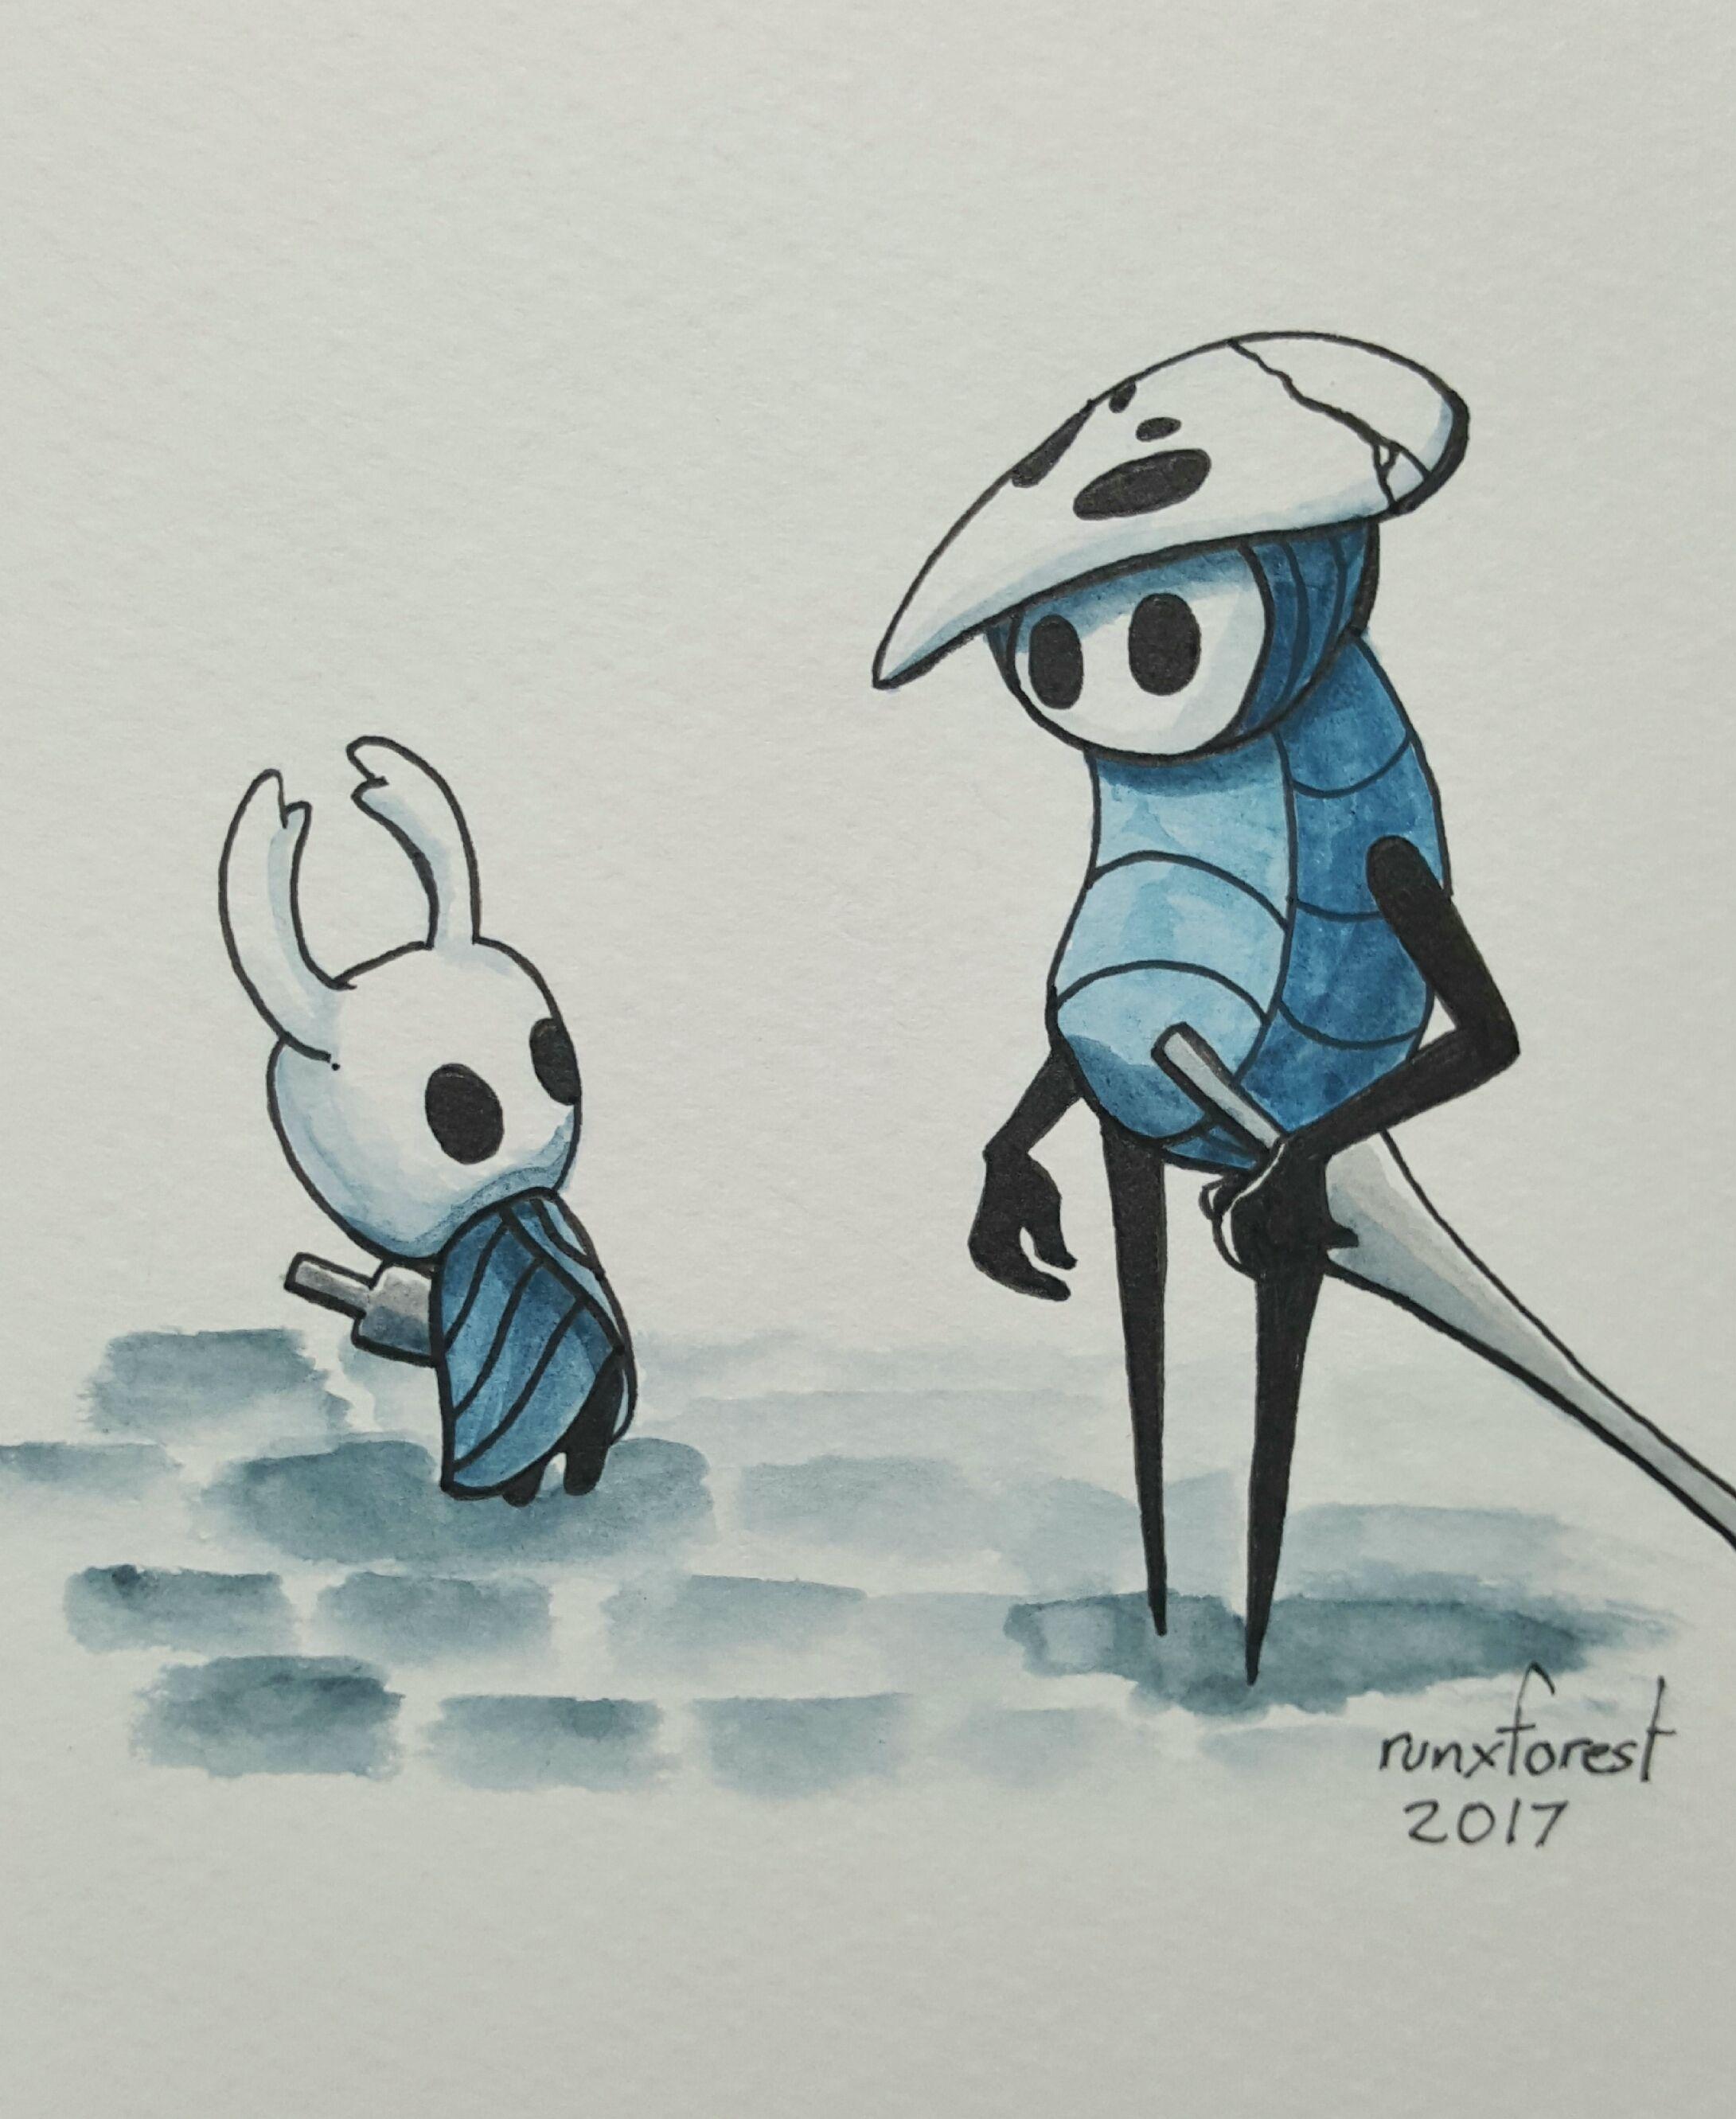 Hollow knight and Quirrel